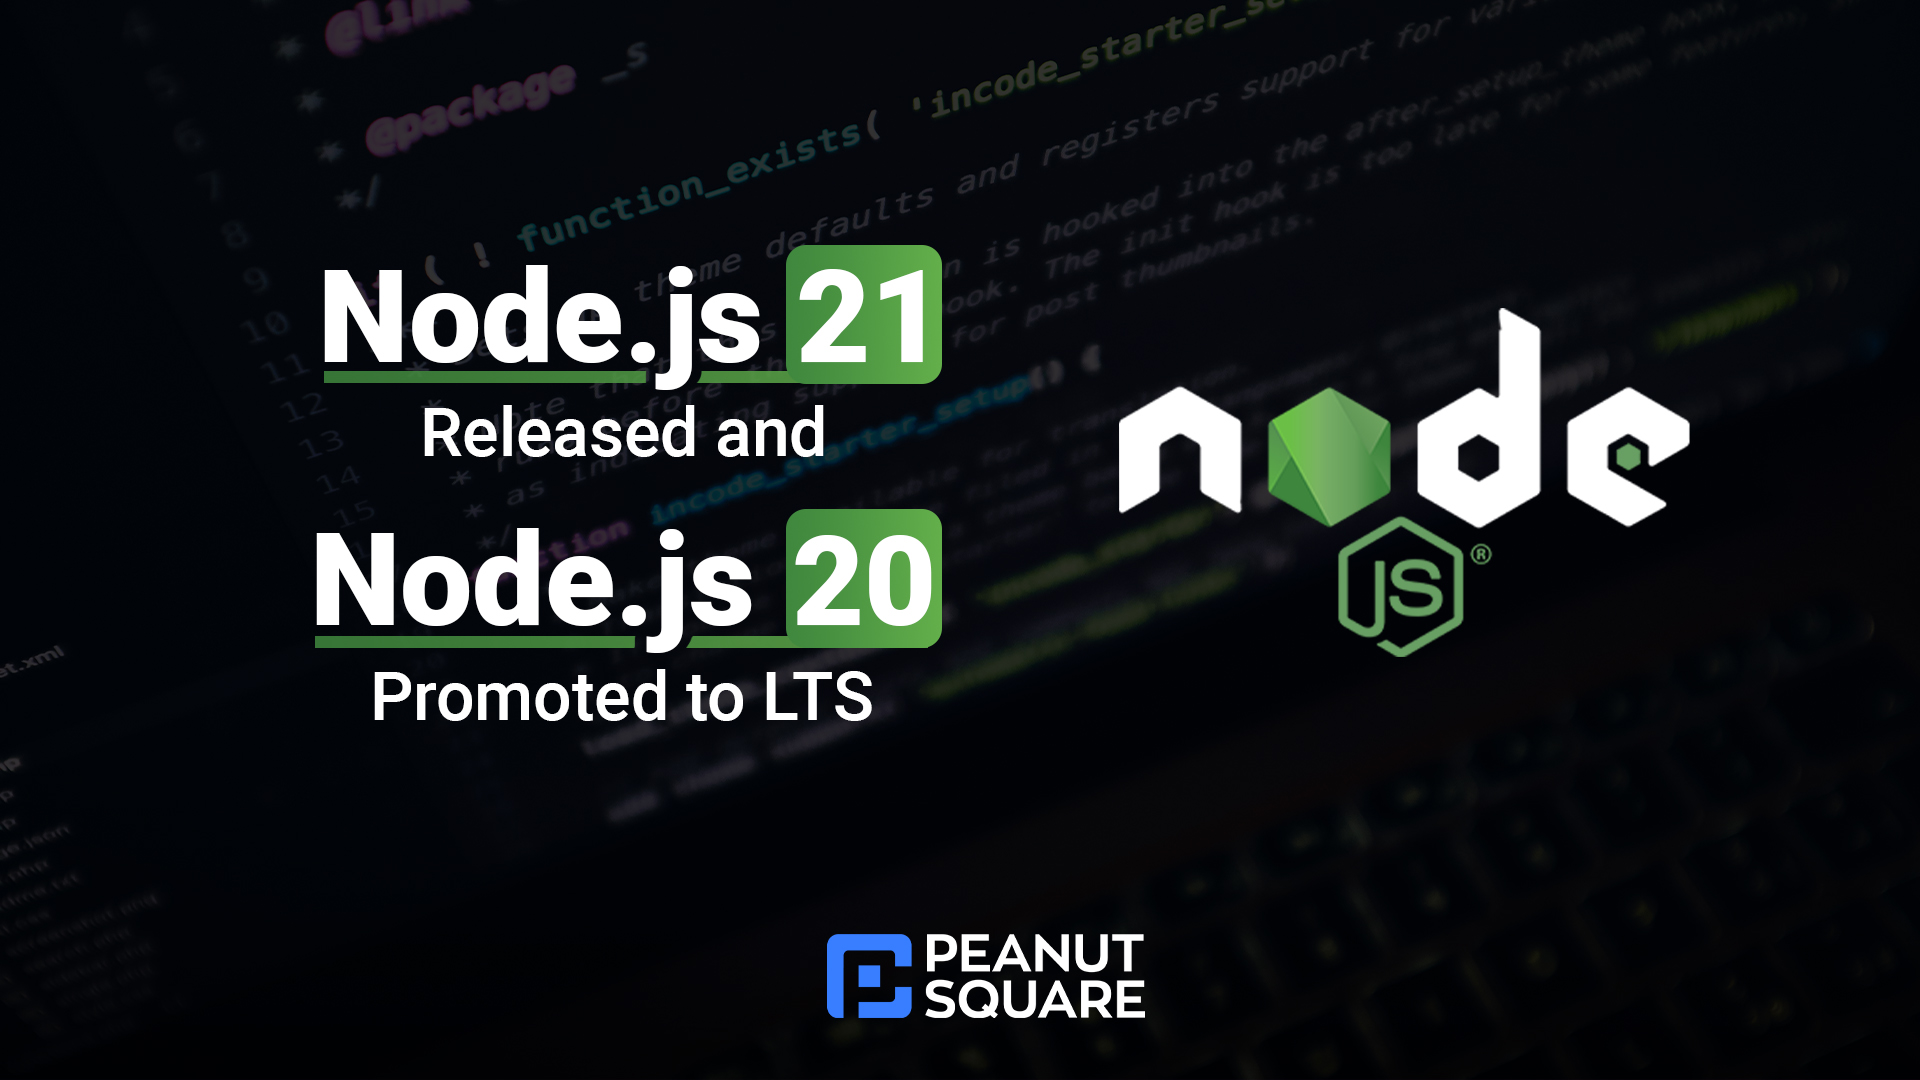 Node.js 21 Released and Node.js 20 Promoted to LTS